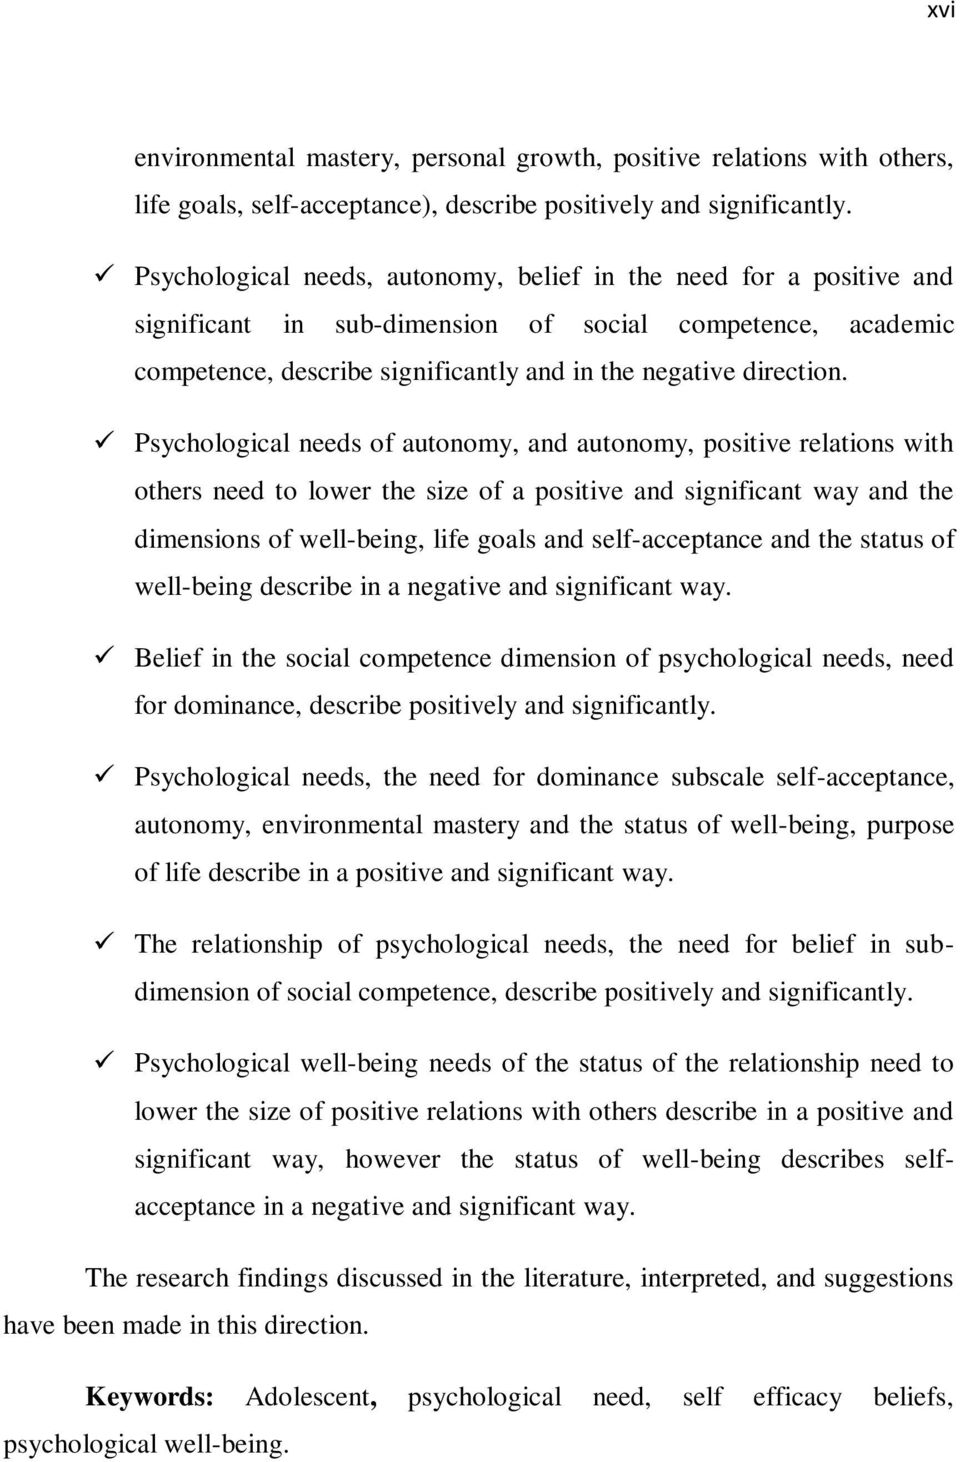 Psychological needs of autonomy, and autonomy, positive relations with others need to lower the size of a positive and significant way and the dimensions of well-being, life goals and self-acceptance